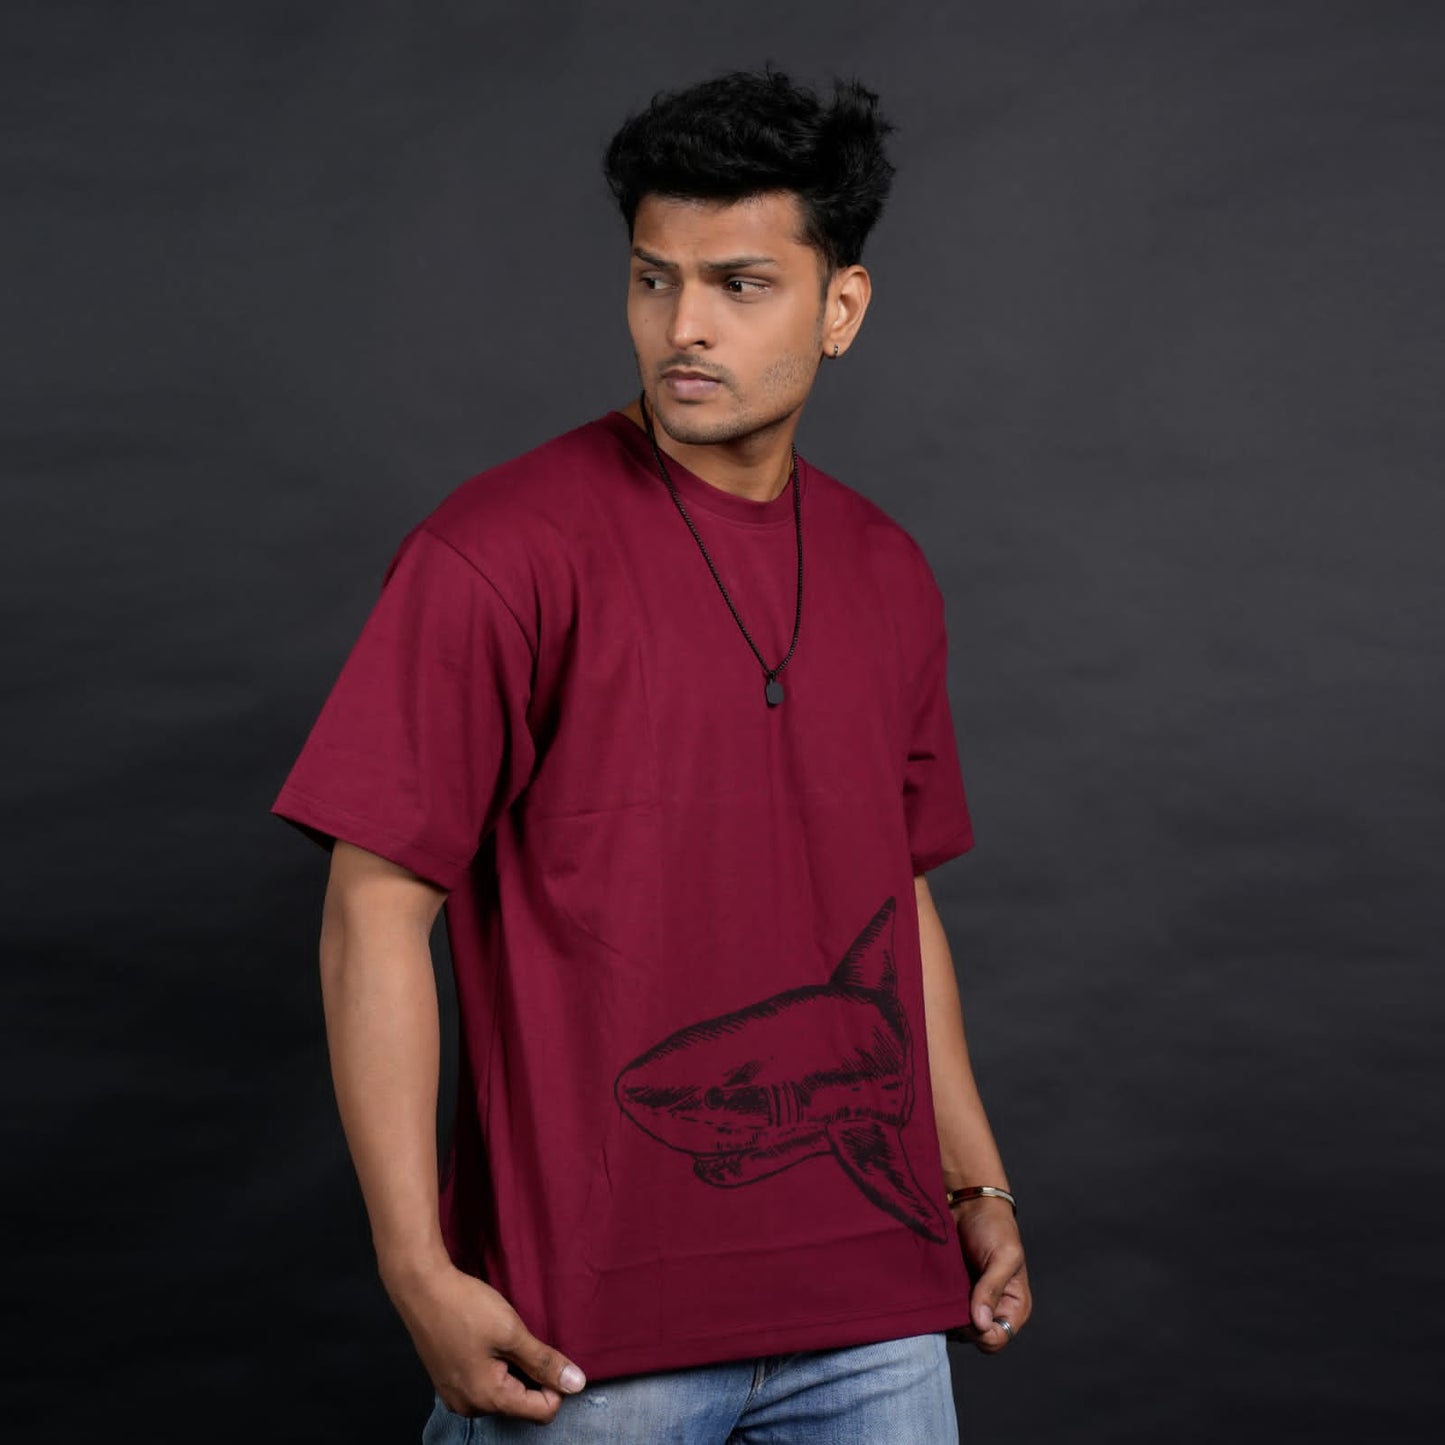 Shark Printed Tees for Bold Style Statements......